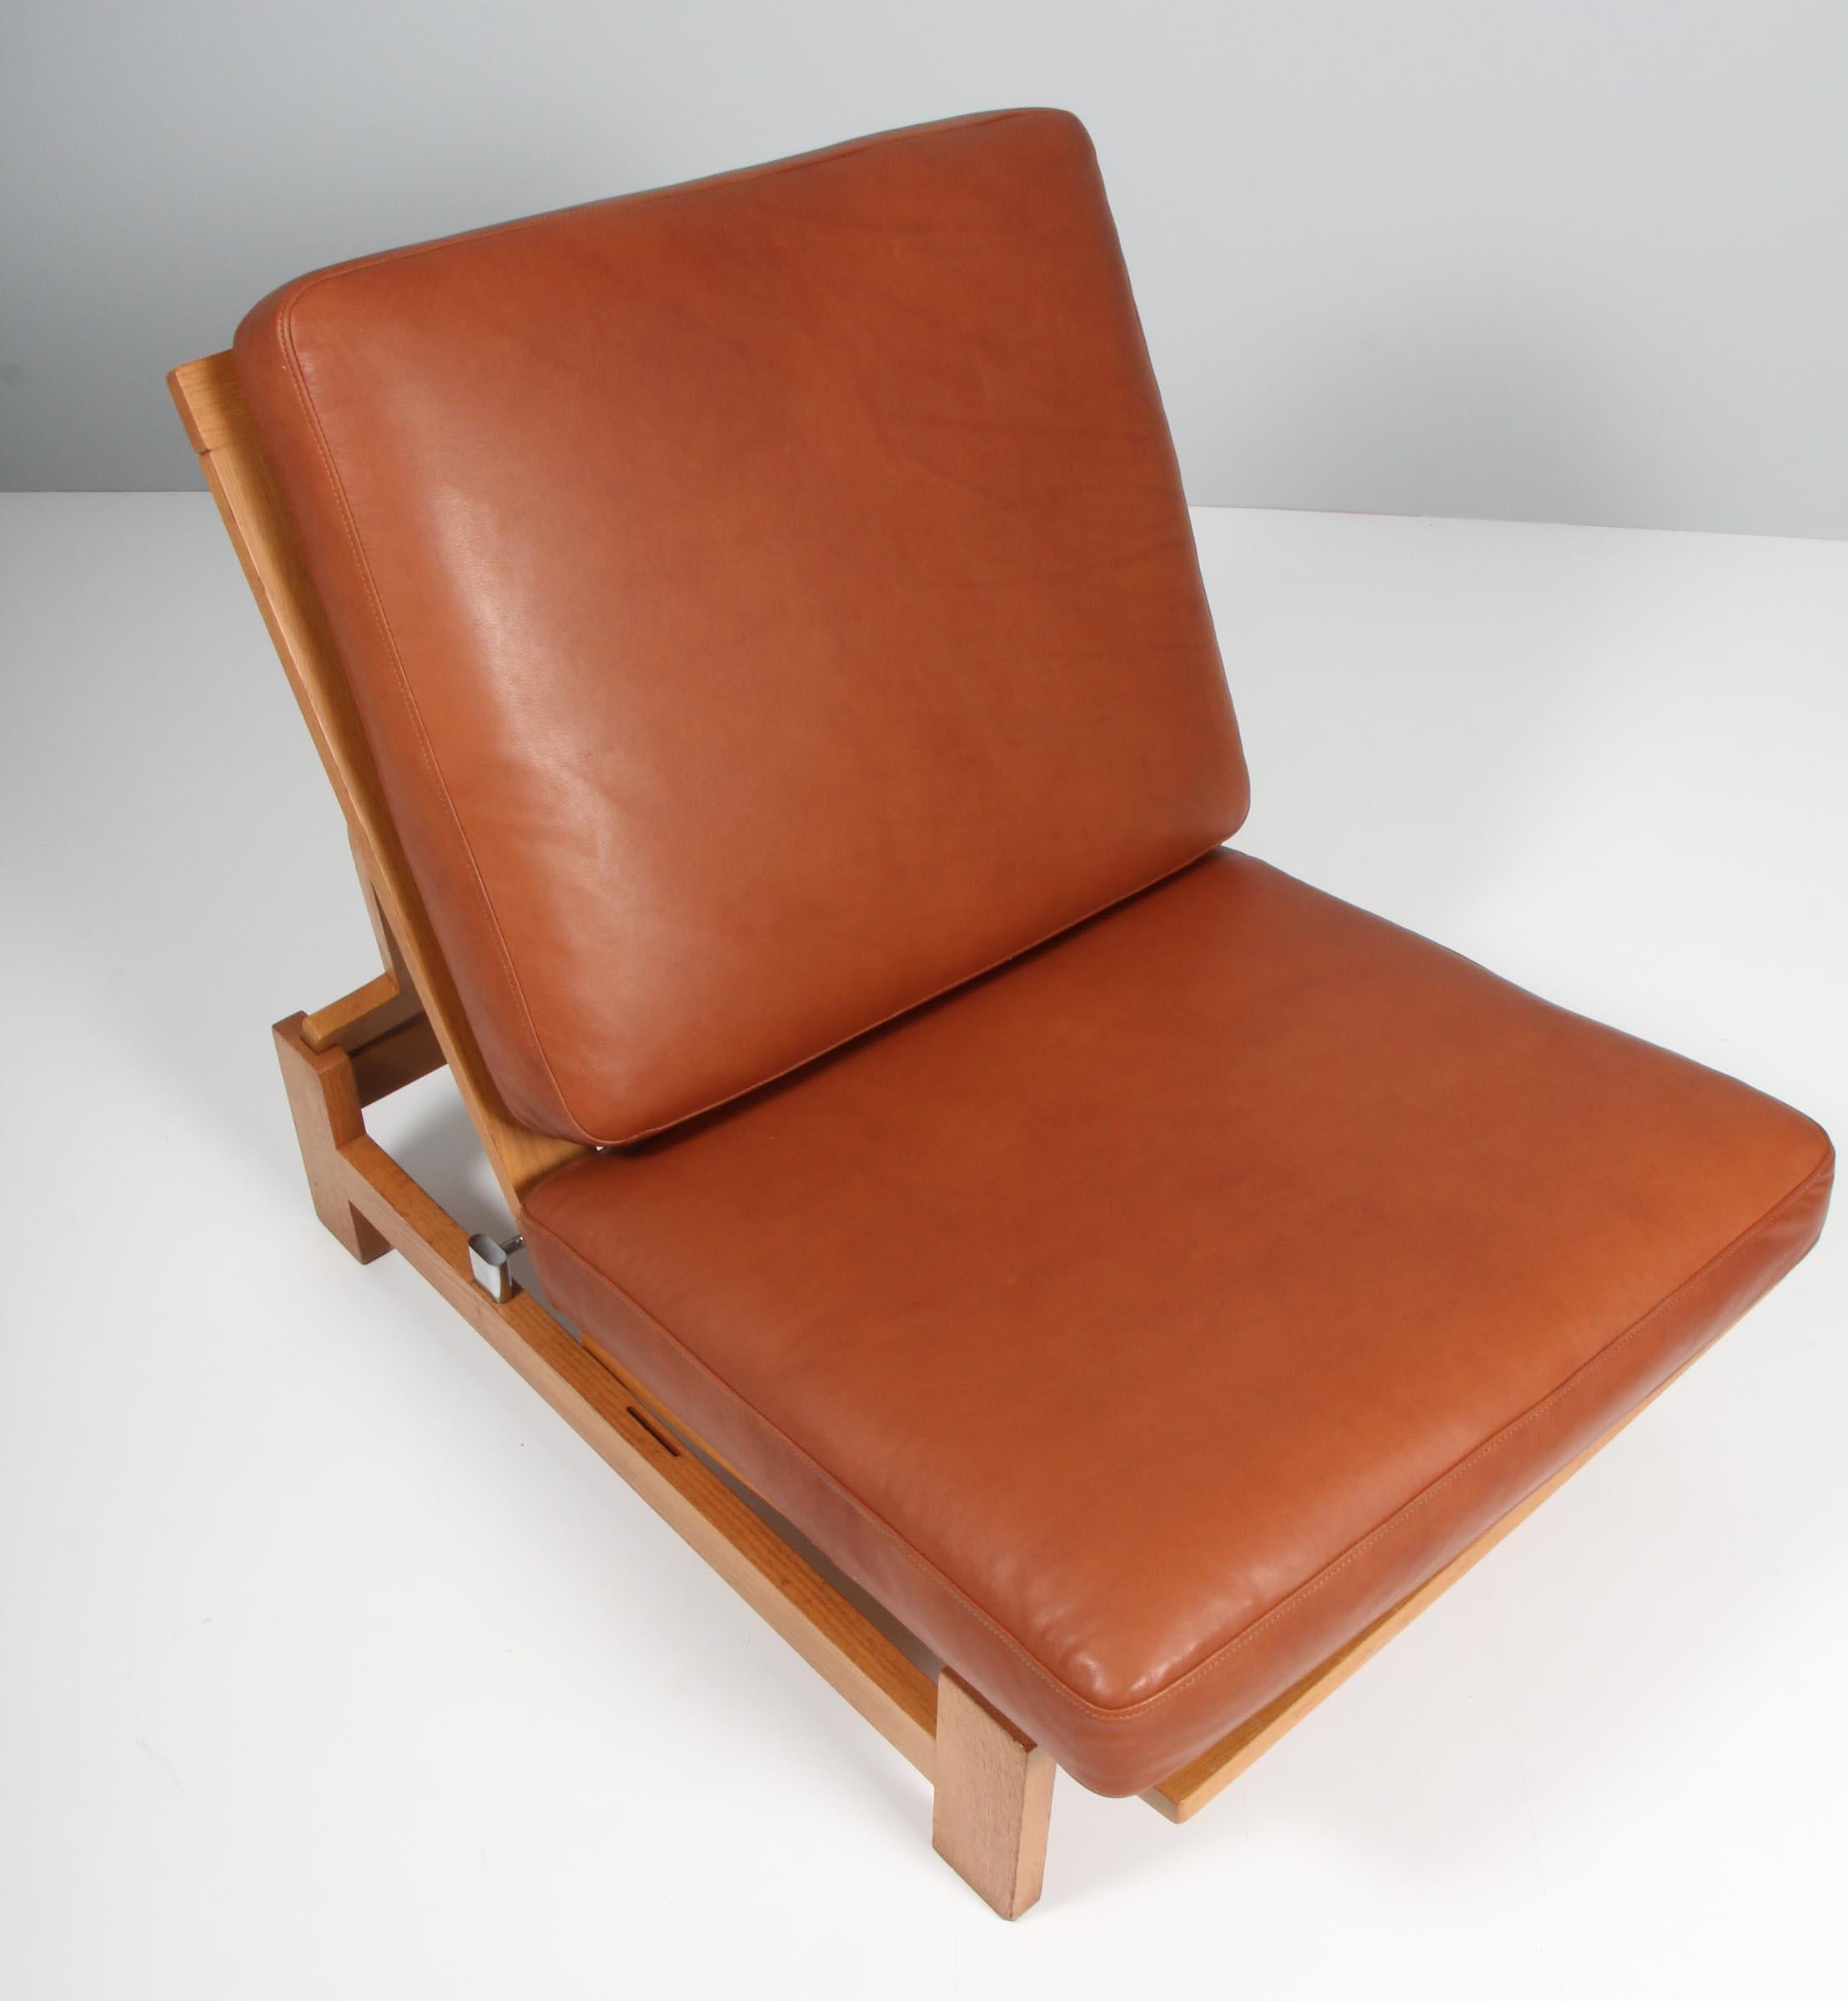 Hans J. Wegner lounge chair and ottoman made of oiled oak

New upholstered with tan aniline leather.

Can lay flat to form a daybed

Model 420, made by GETAMA.

